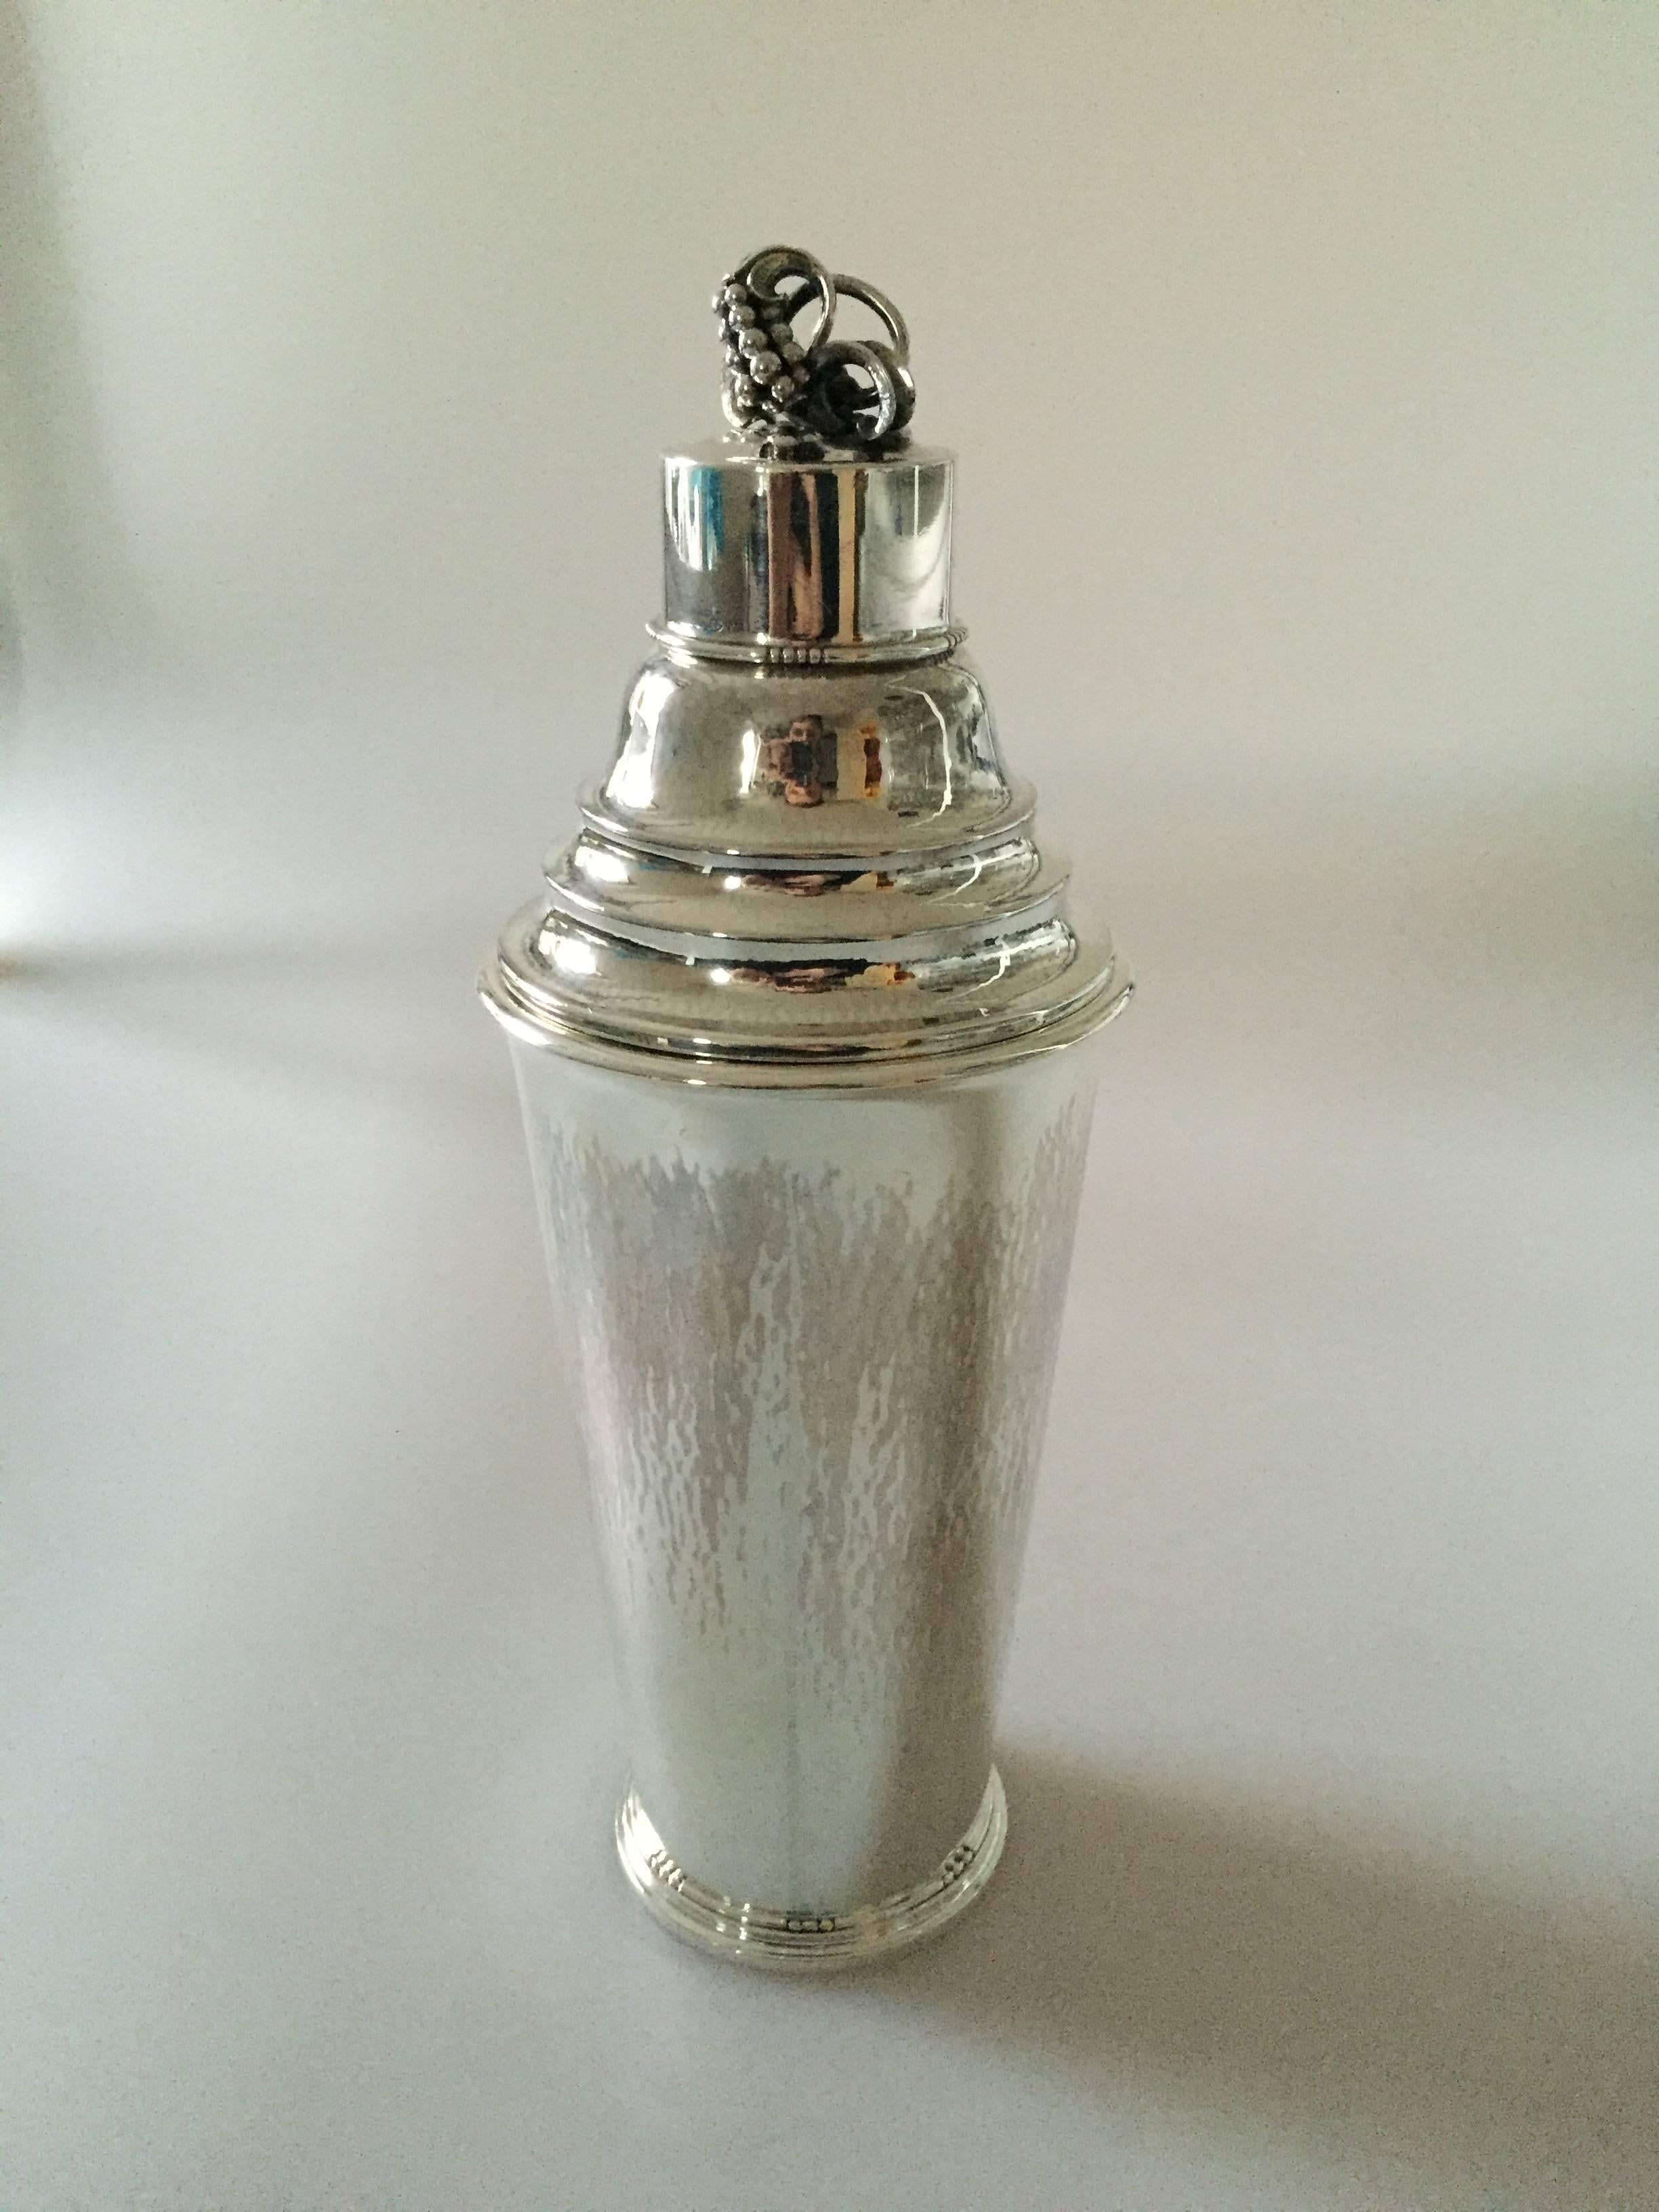 Georg Jensen sterling silver cocktail shaker from 1945-1951 by Harald Nielsen #462D. 

Measures 25.5 cm (10 3/64) H.
Weighs 580 g (20.45oz.)